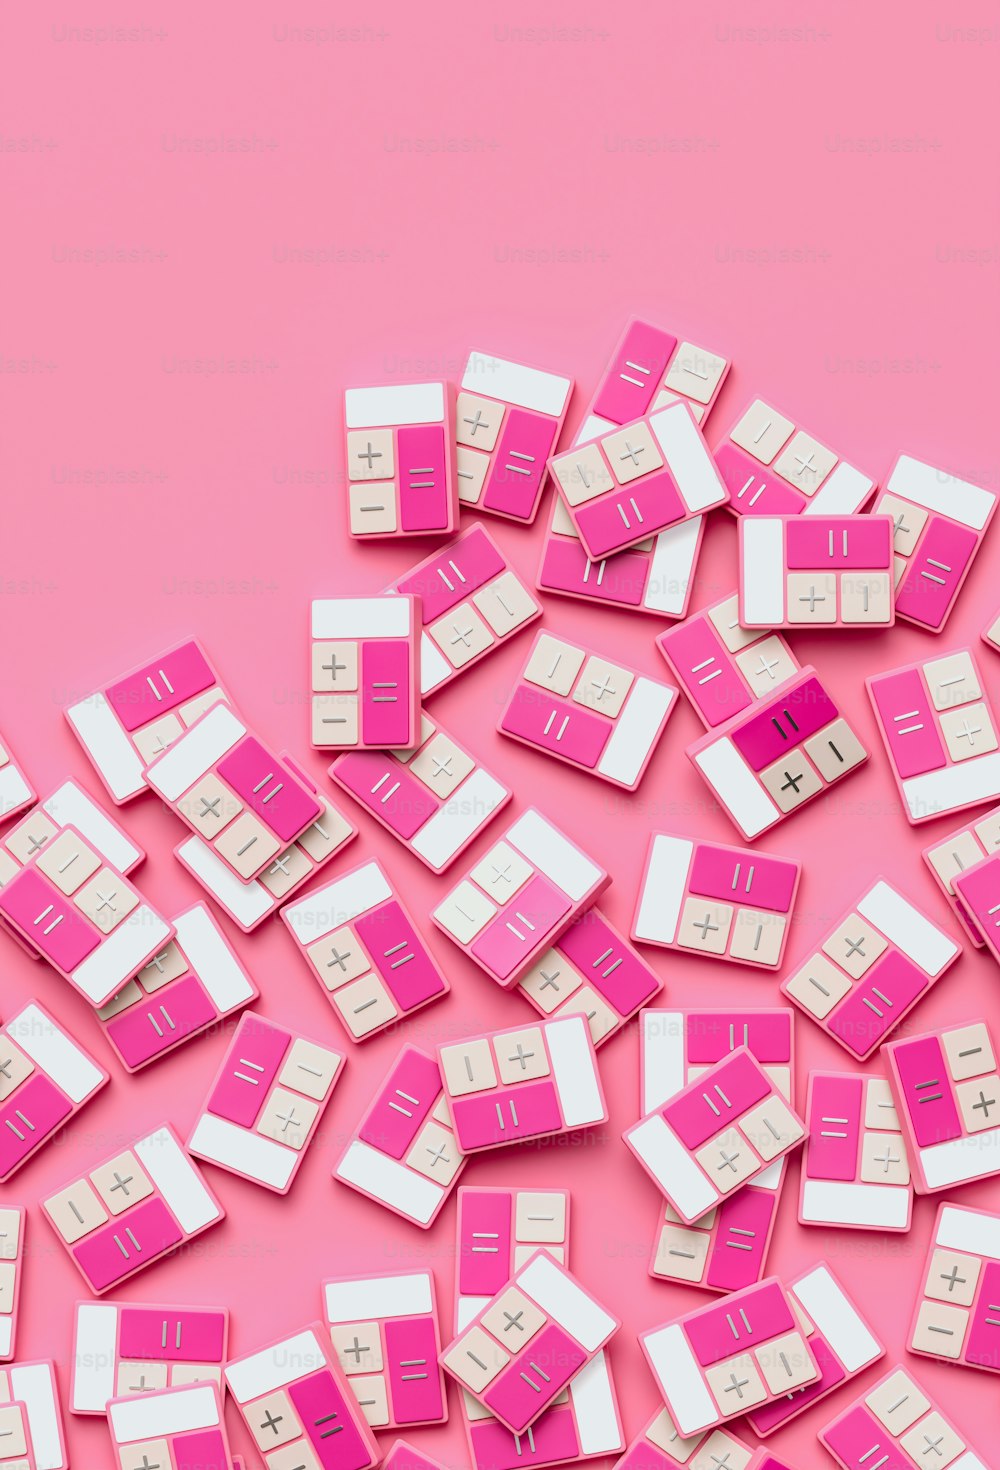 a pile of pink and white computer keyboards on a pink background